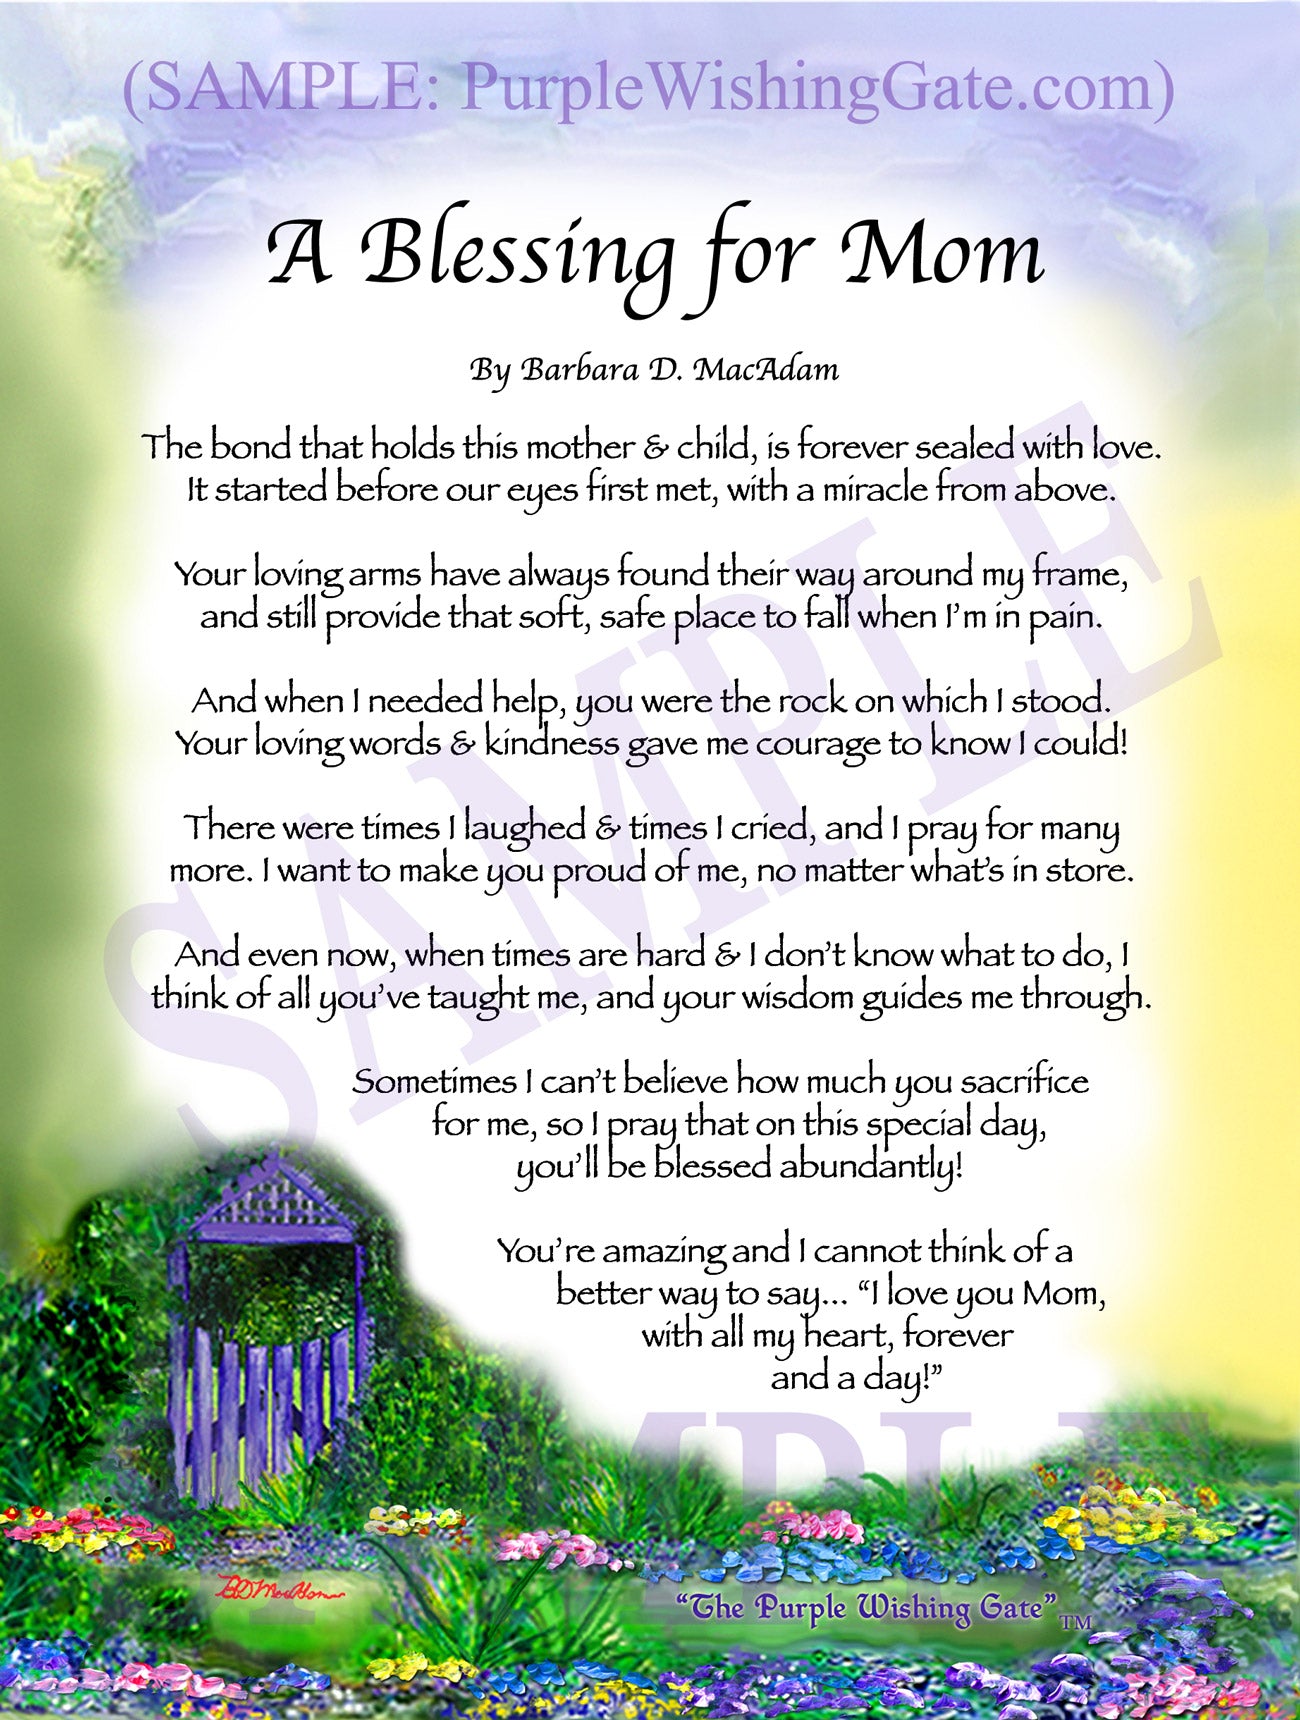 
              
        		A Blessing for Mom - Gifts for Mom-Mother - PurpleWishingGate.com
        		
        	